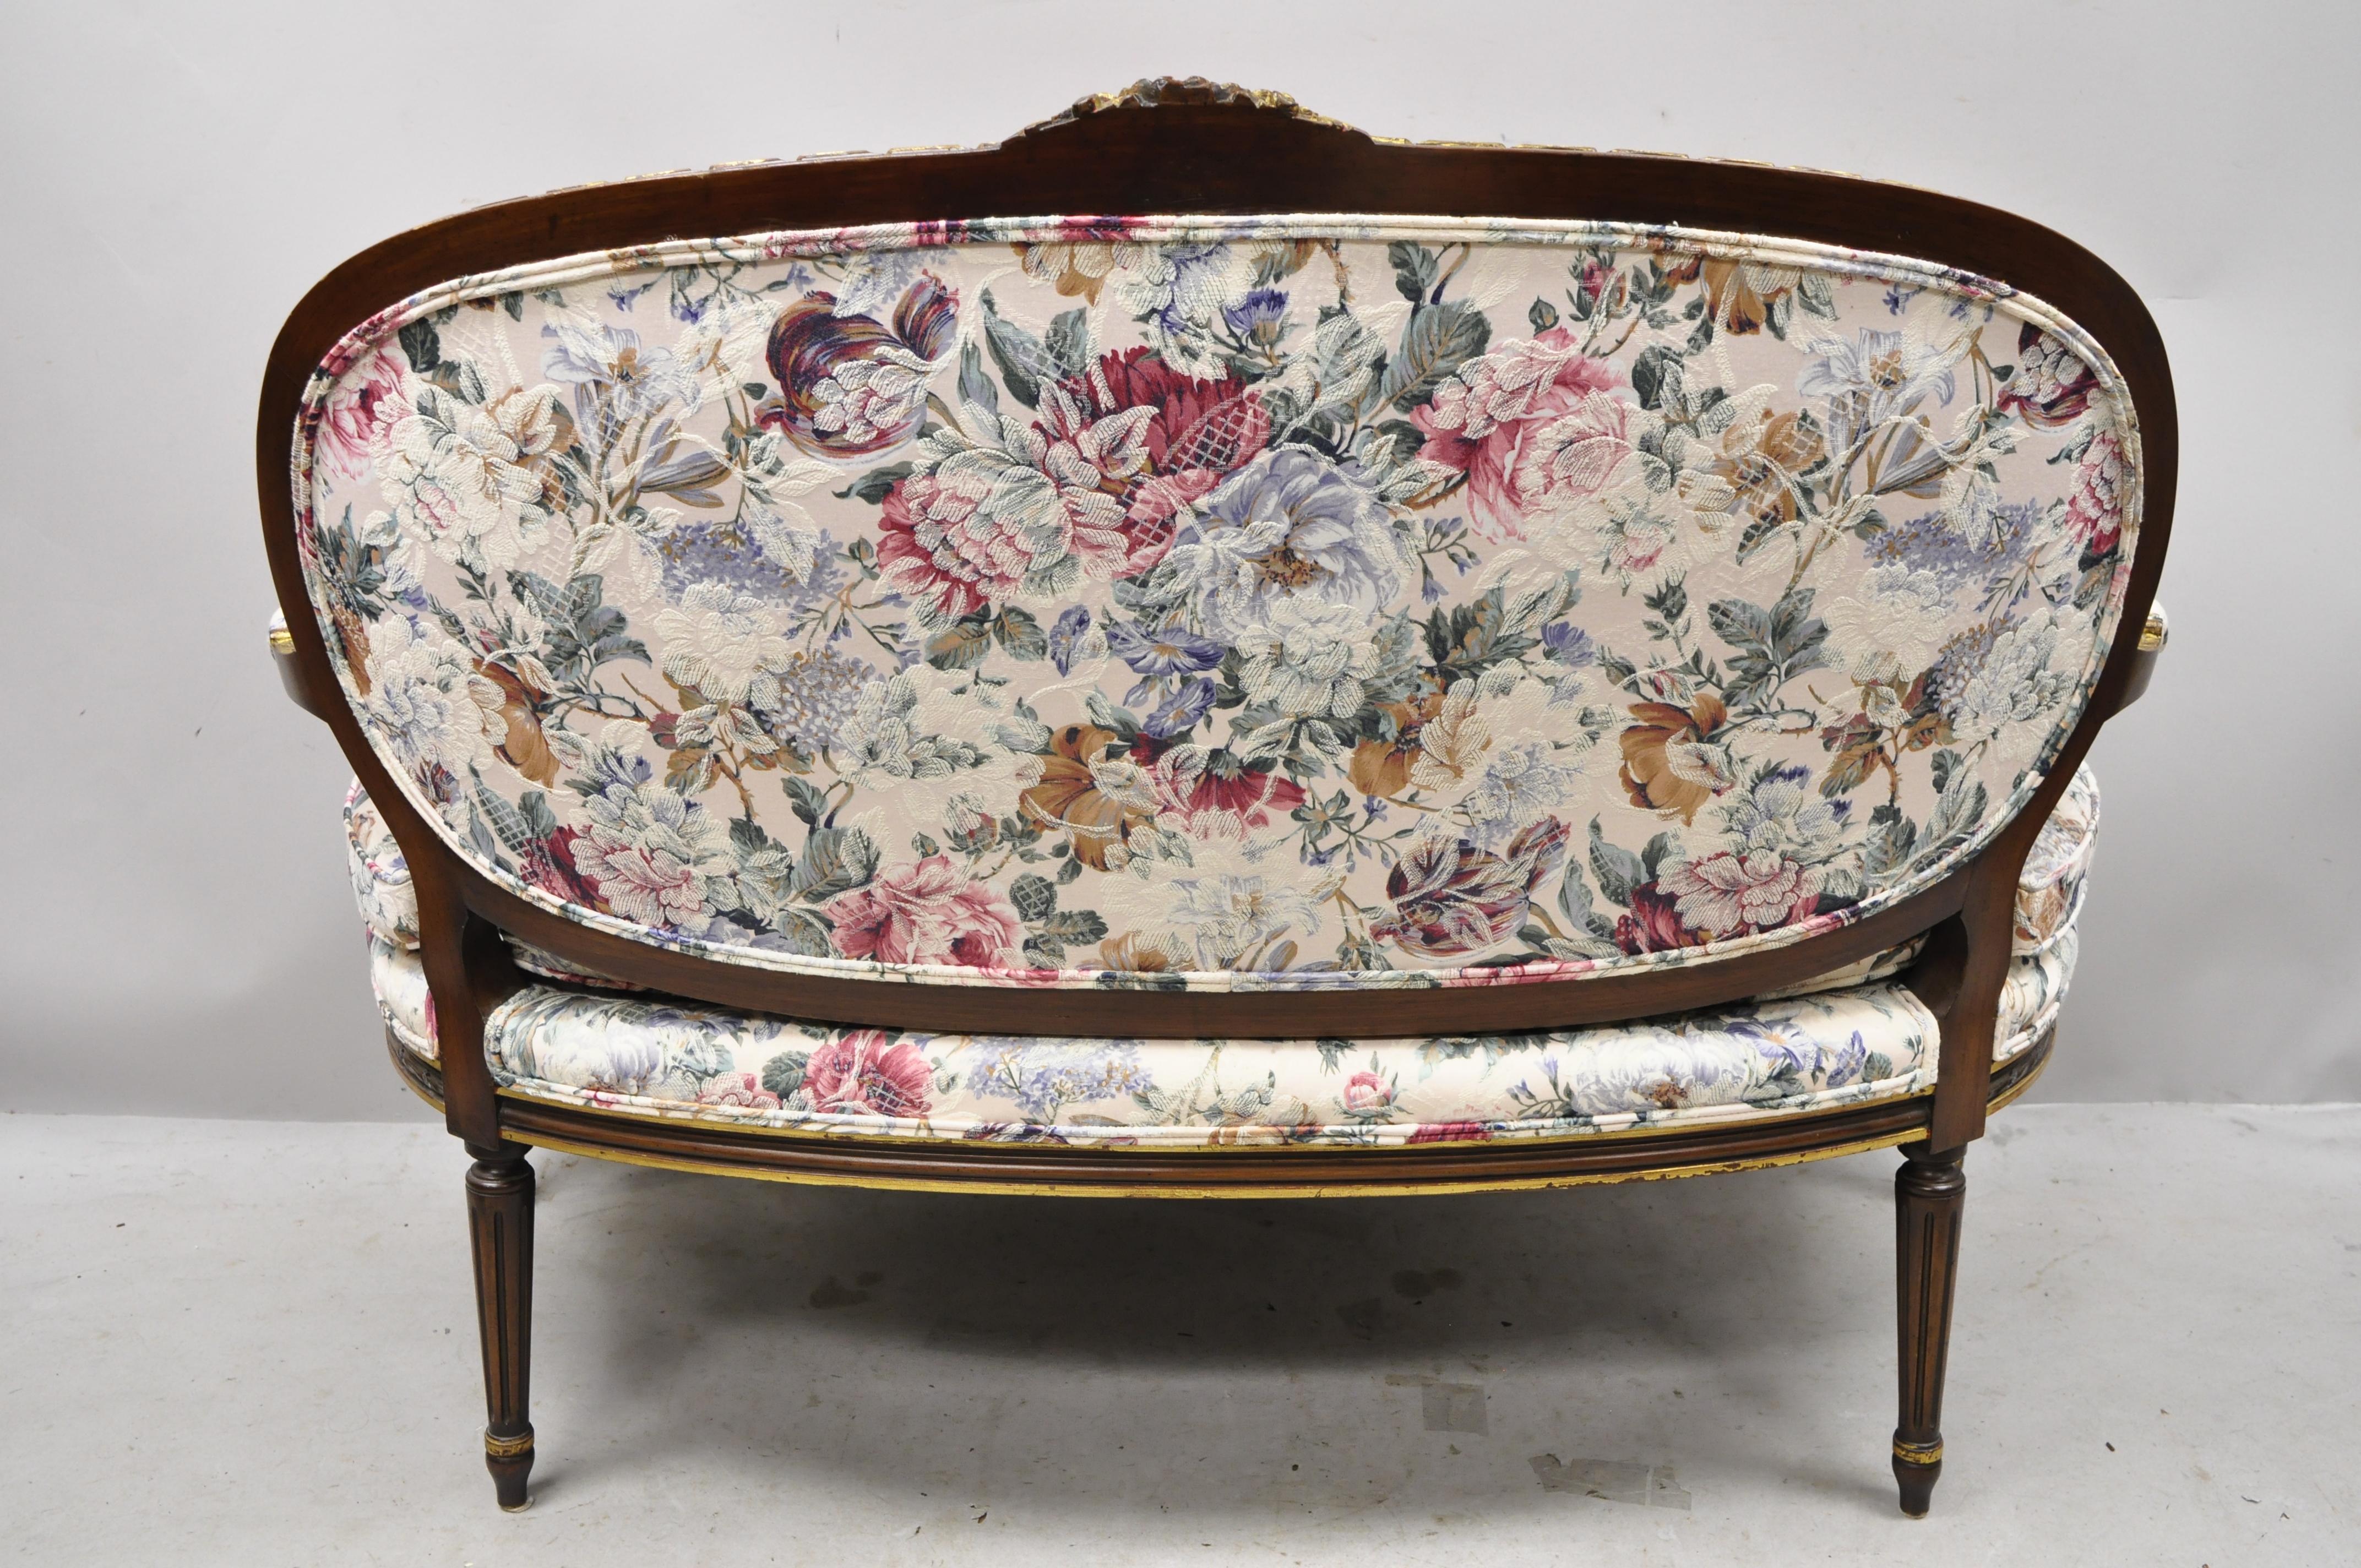 Vintage French Louis XVI Gold Giltwood Floral Upholstered Loveseat Settee Sofa 4